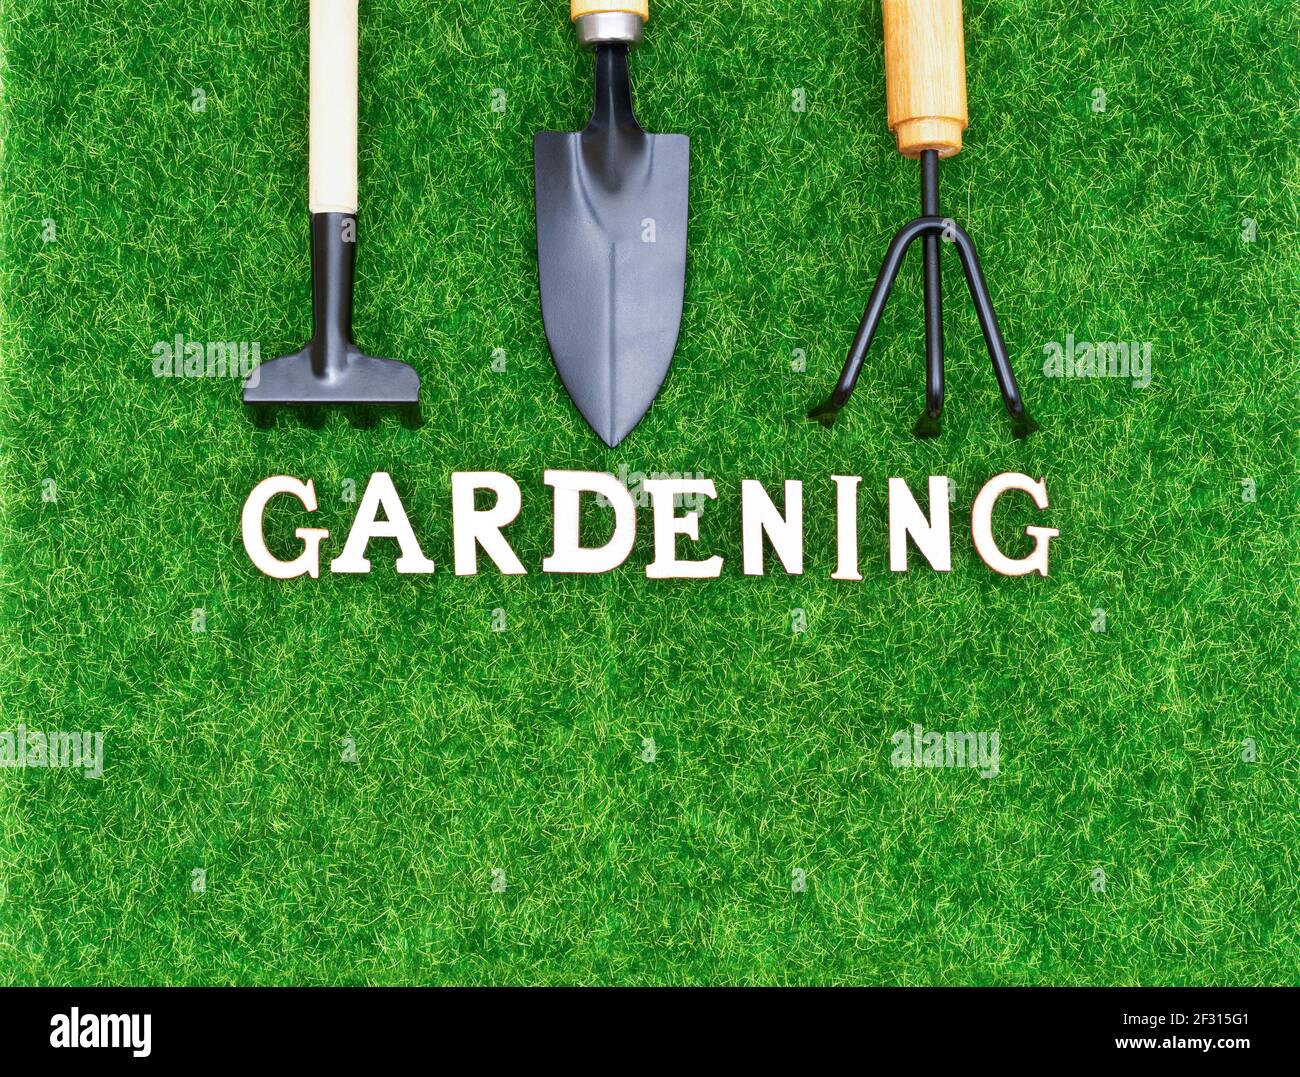 Garden hand tools on synthetic grass with lettering GARDENING made of wooden letters. Stock Photo